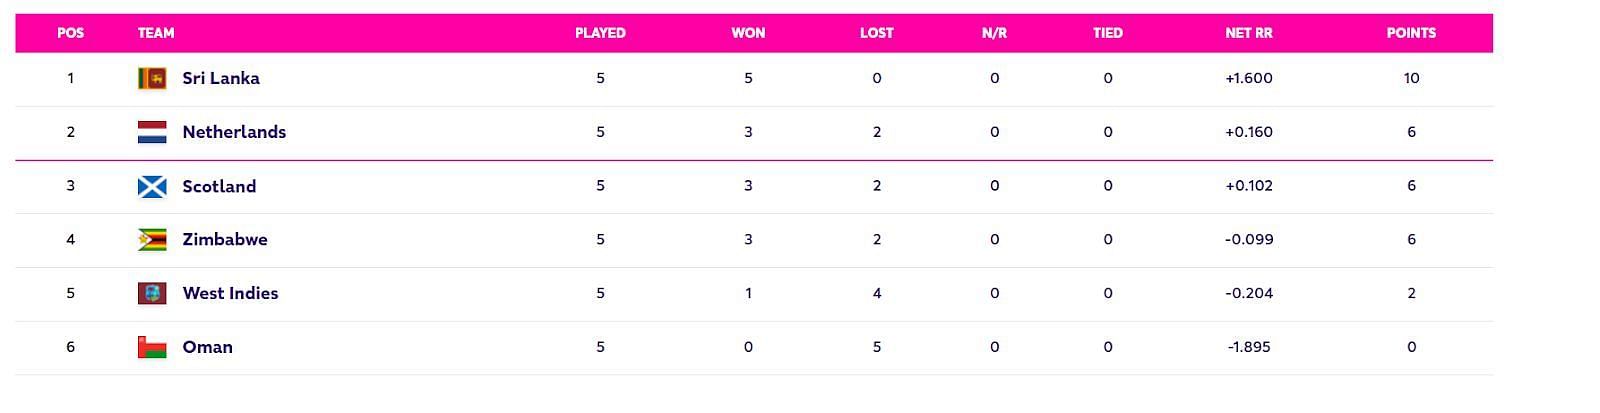 Updated Points Table after West Indies vs Sri Lanka clash (Image Courtesy: ICC Cricket)